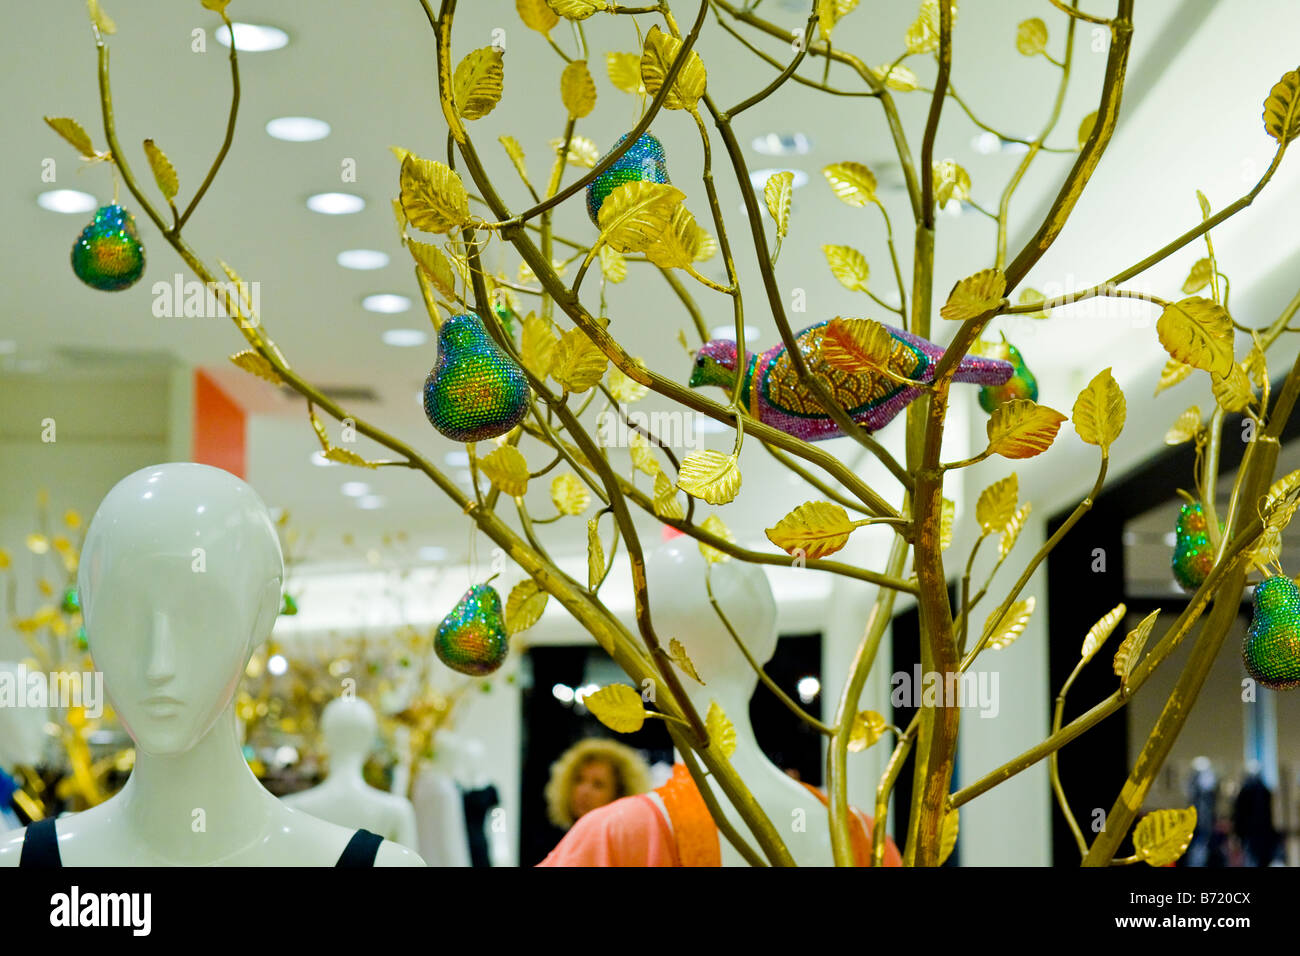 Gardens Shopping Mall or center Xmas decorations in store with a partridge in a pear tree by mannequins in department store Stock Photo